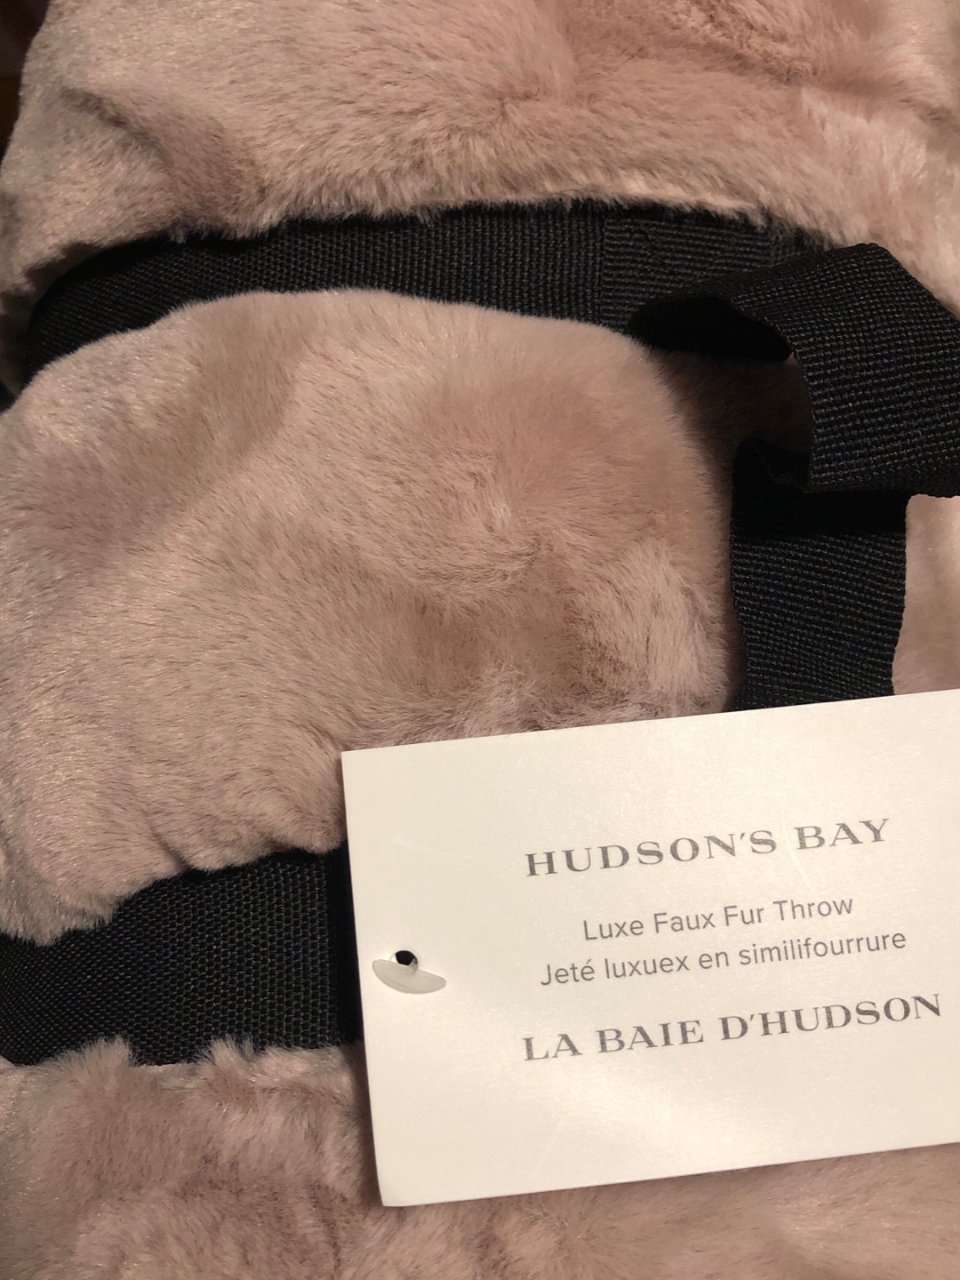 Hudson's Bay Company Luxe Faux Fur Throw: $24.99 with a minimum $50 purchase before tax | TheBay